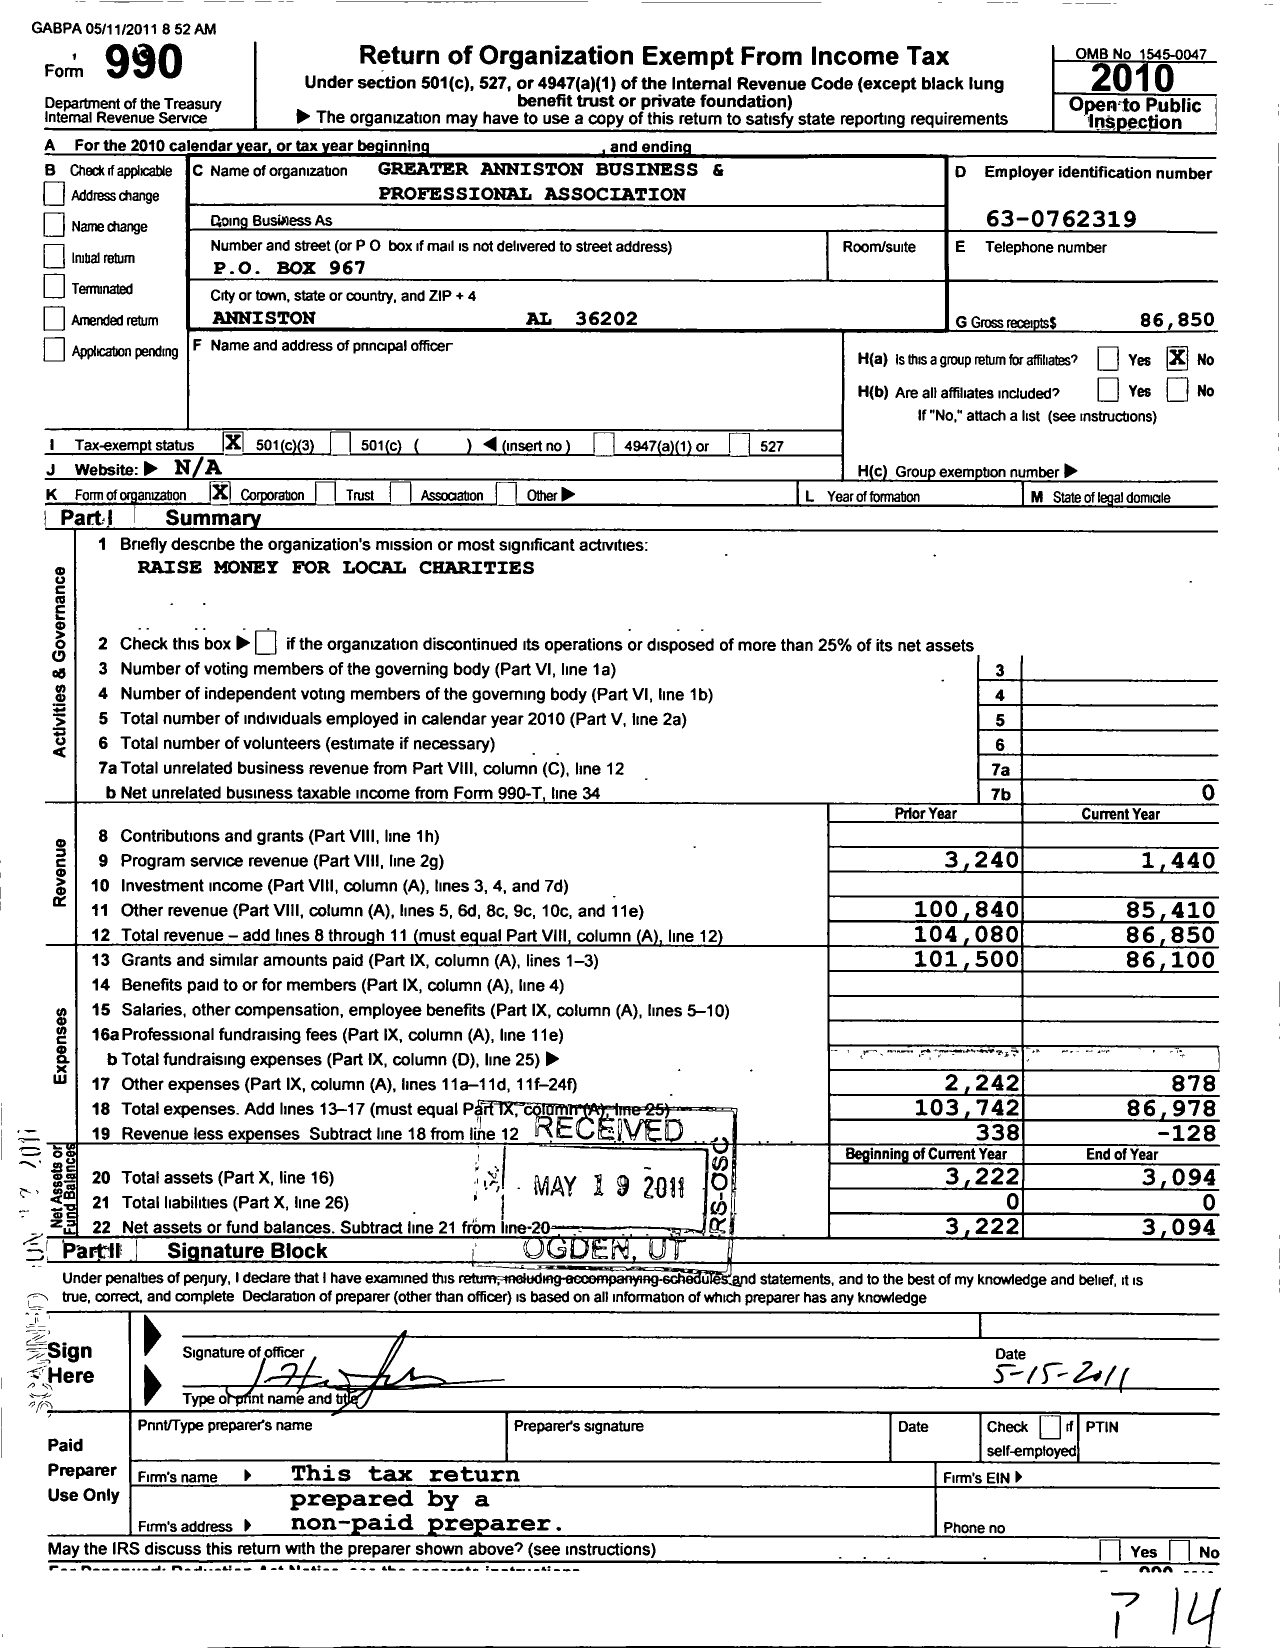 Image of first page of 2010 Form 990 for Greater Anniston Business Professional Association